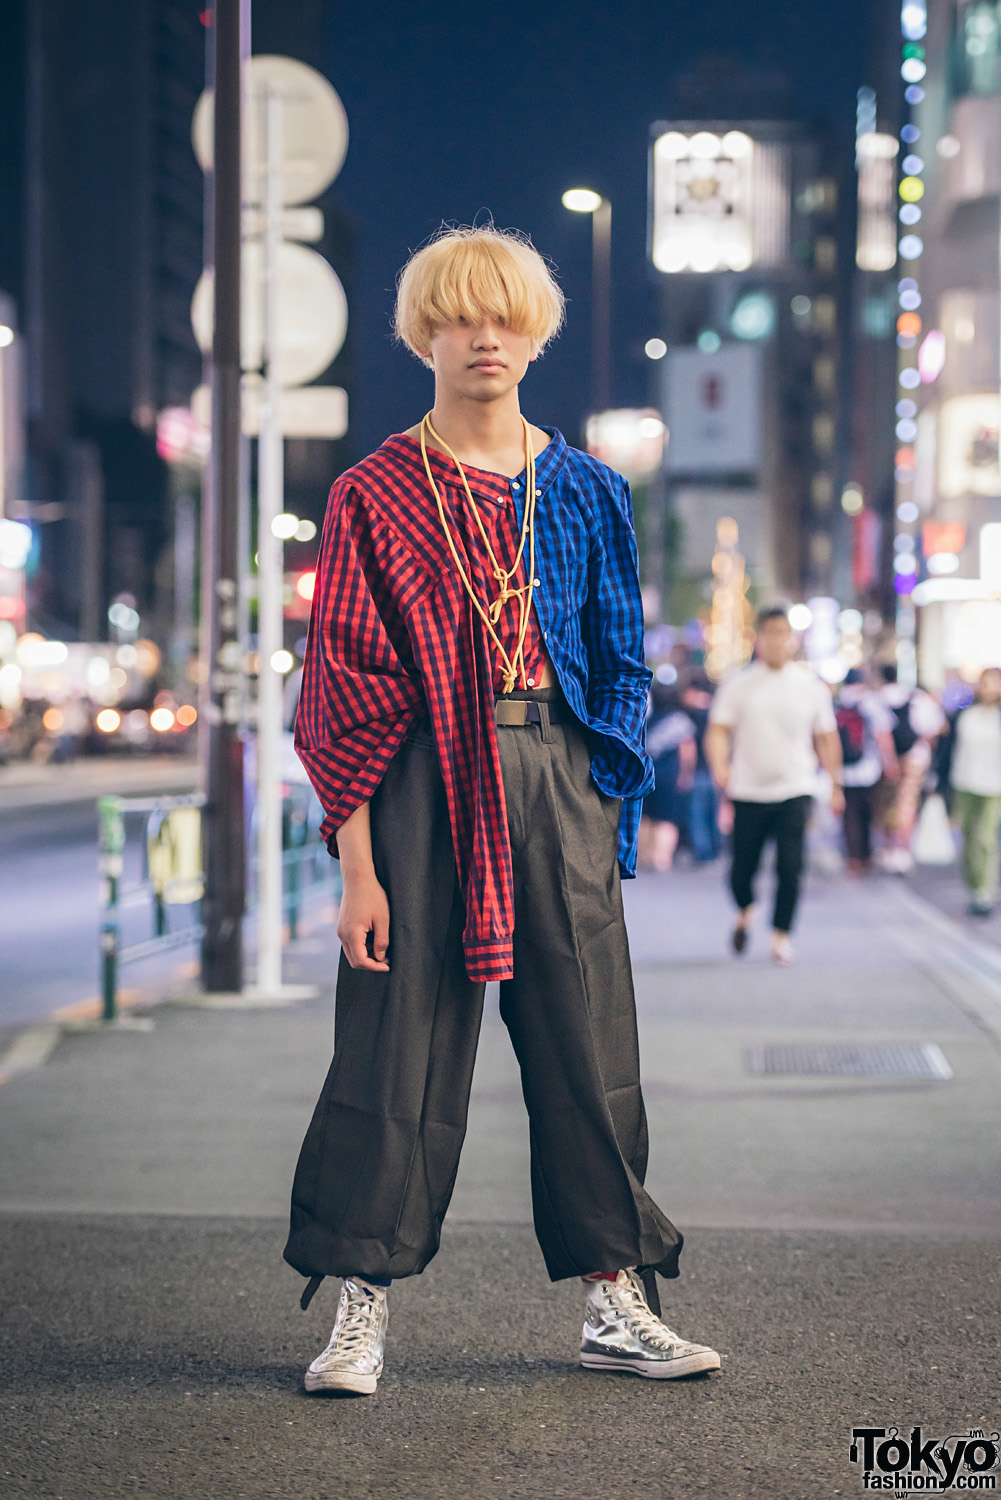 Harajuku Guy in Plaid Street Style w/ Deconstructed Shirt, Rope Necklace & Silver Sneakers